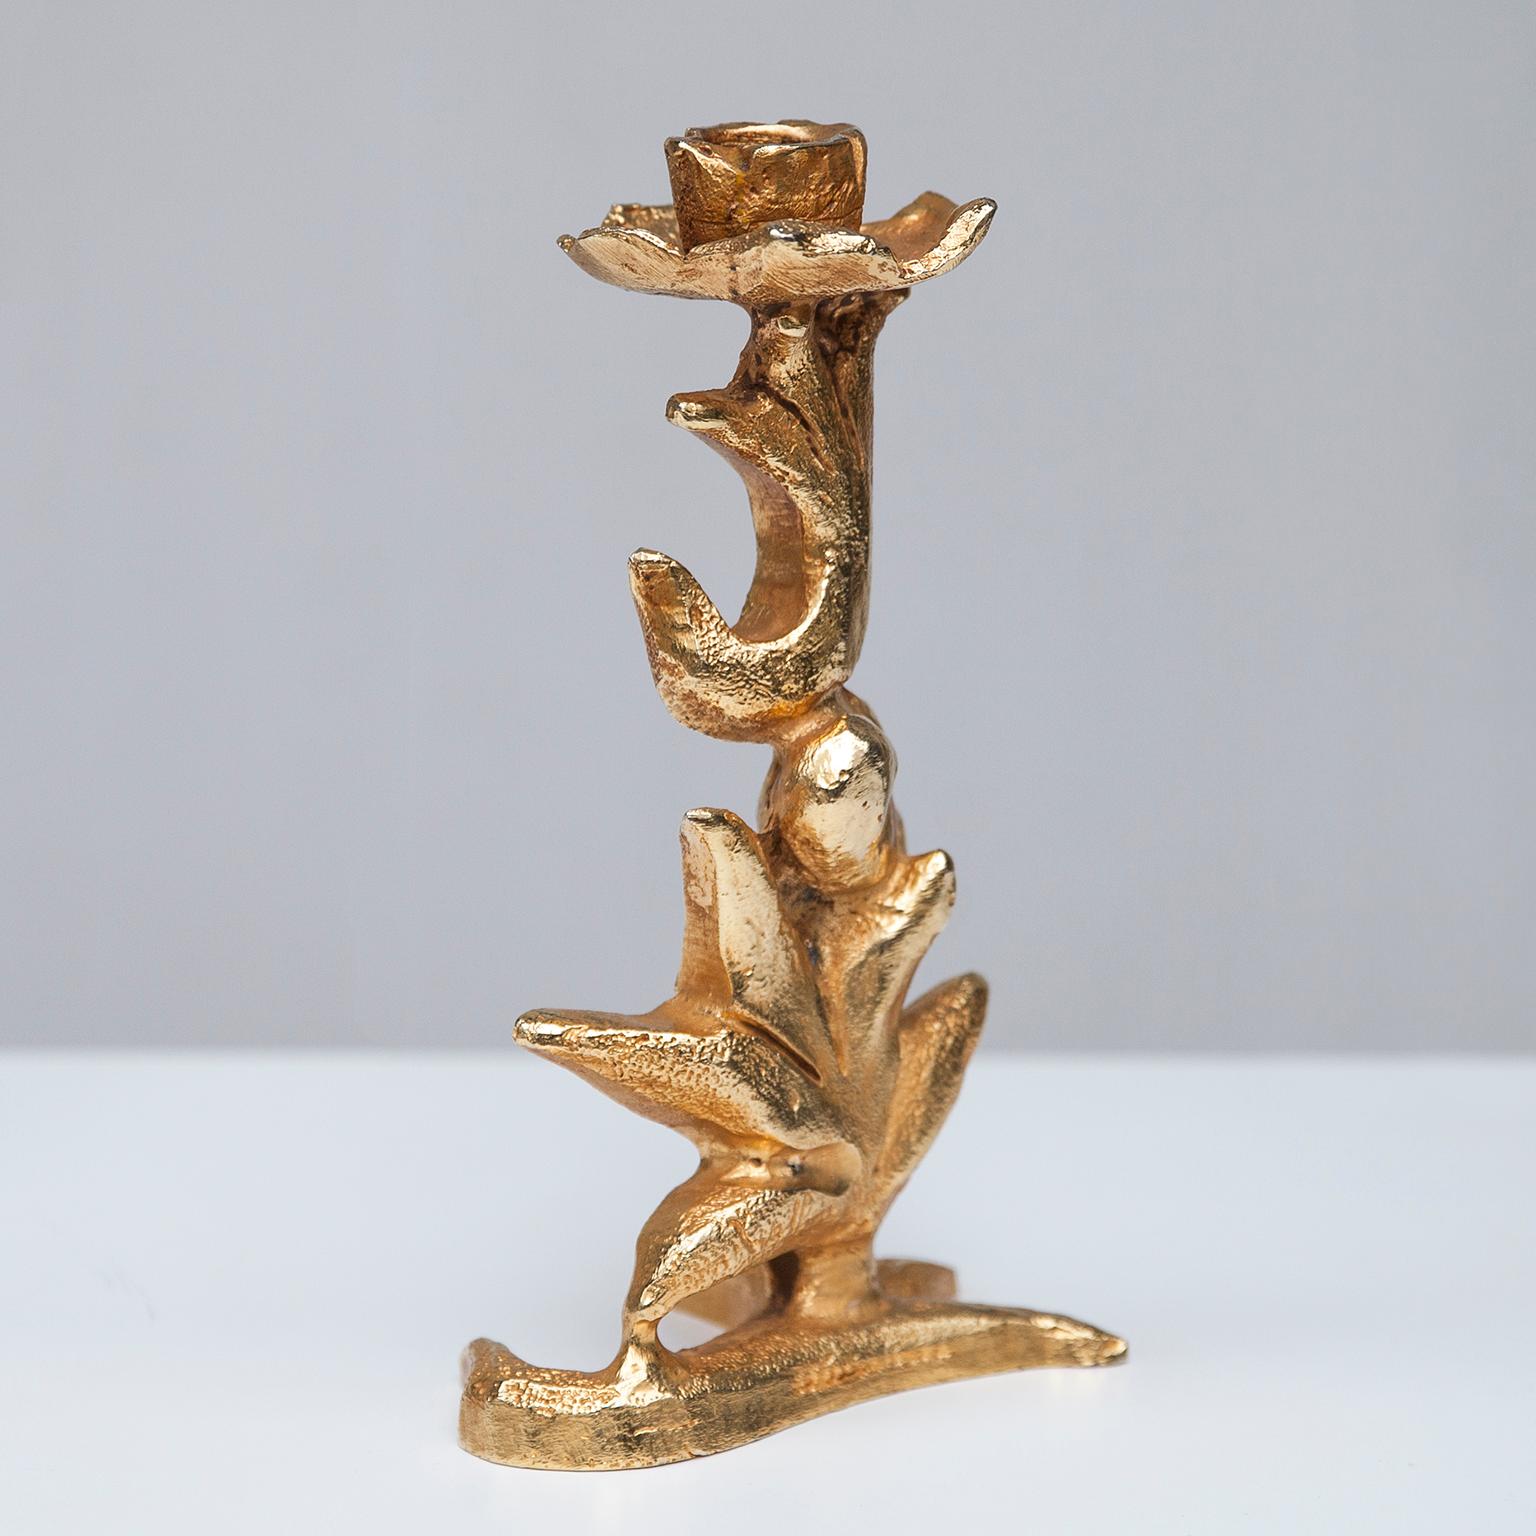 Extremely heavy gilt bronze, this French candlestick is highly collectible. T